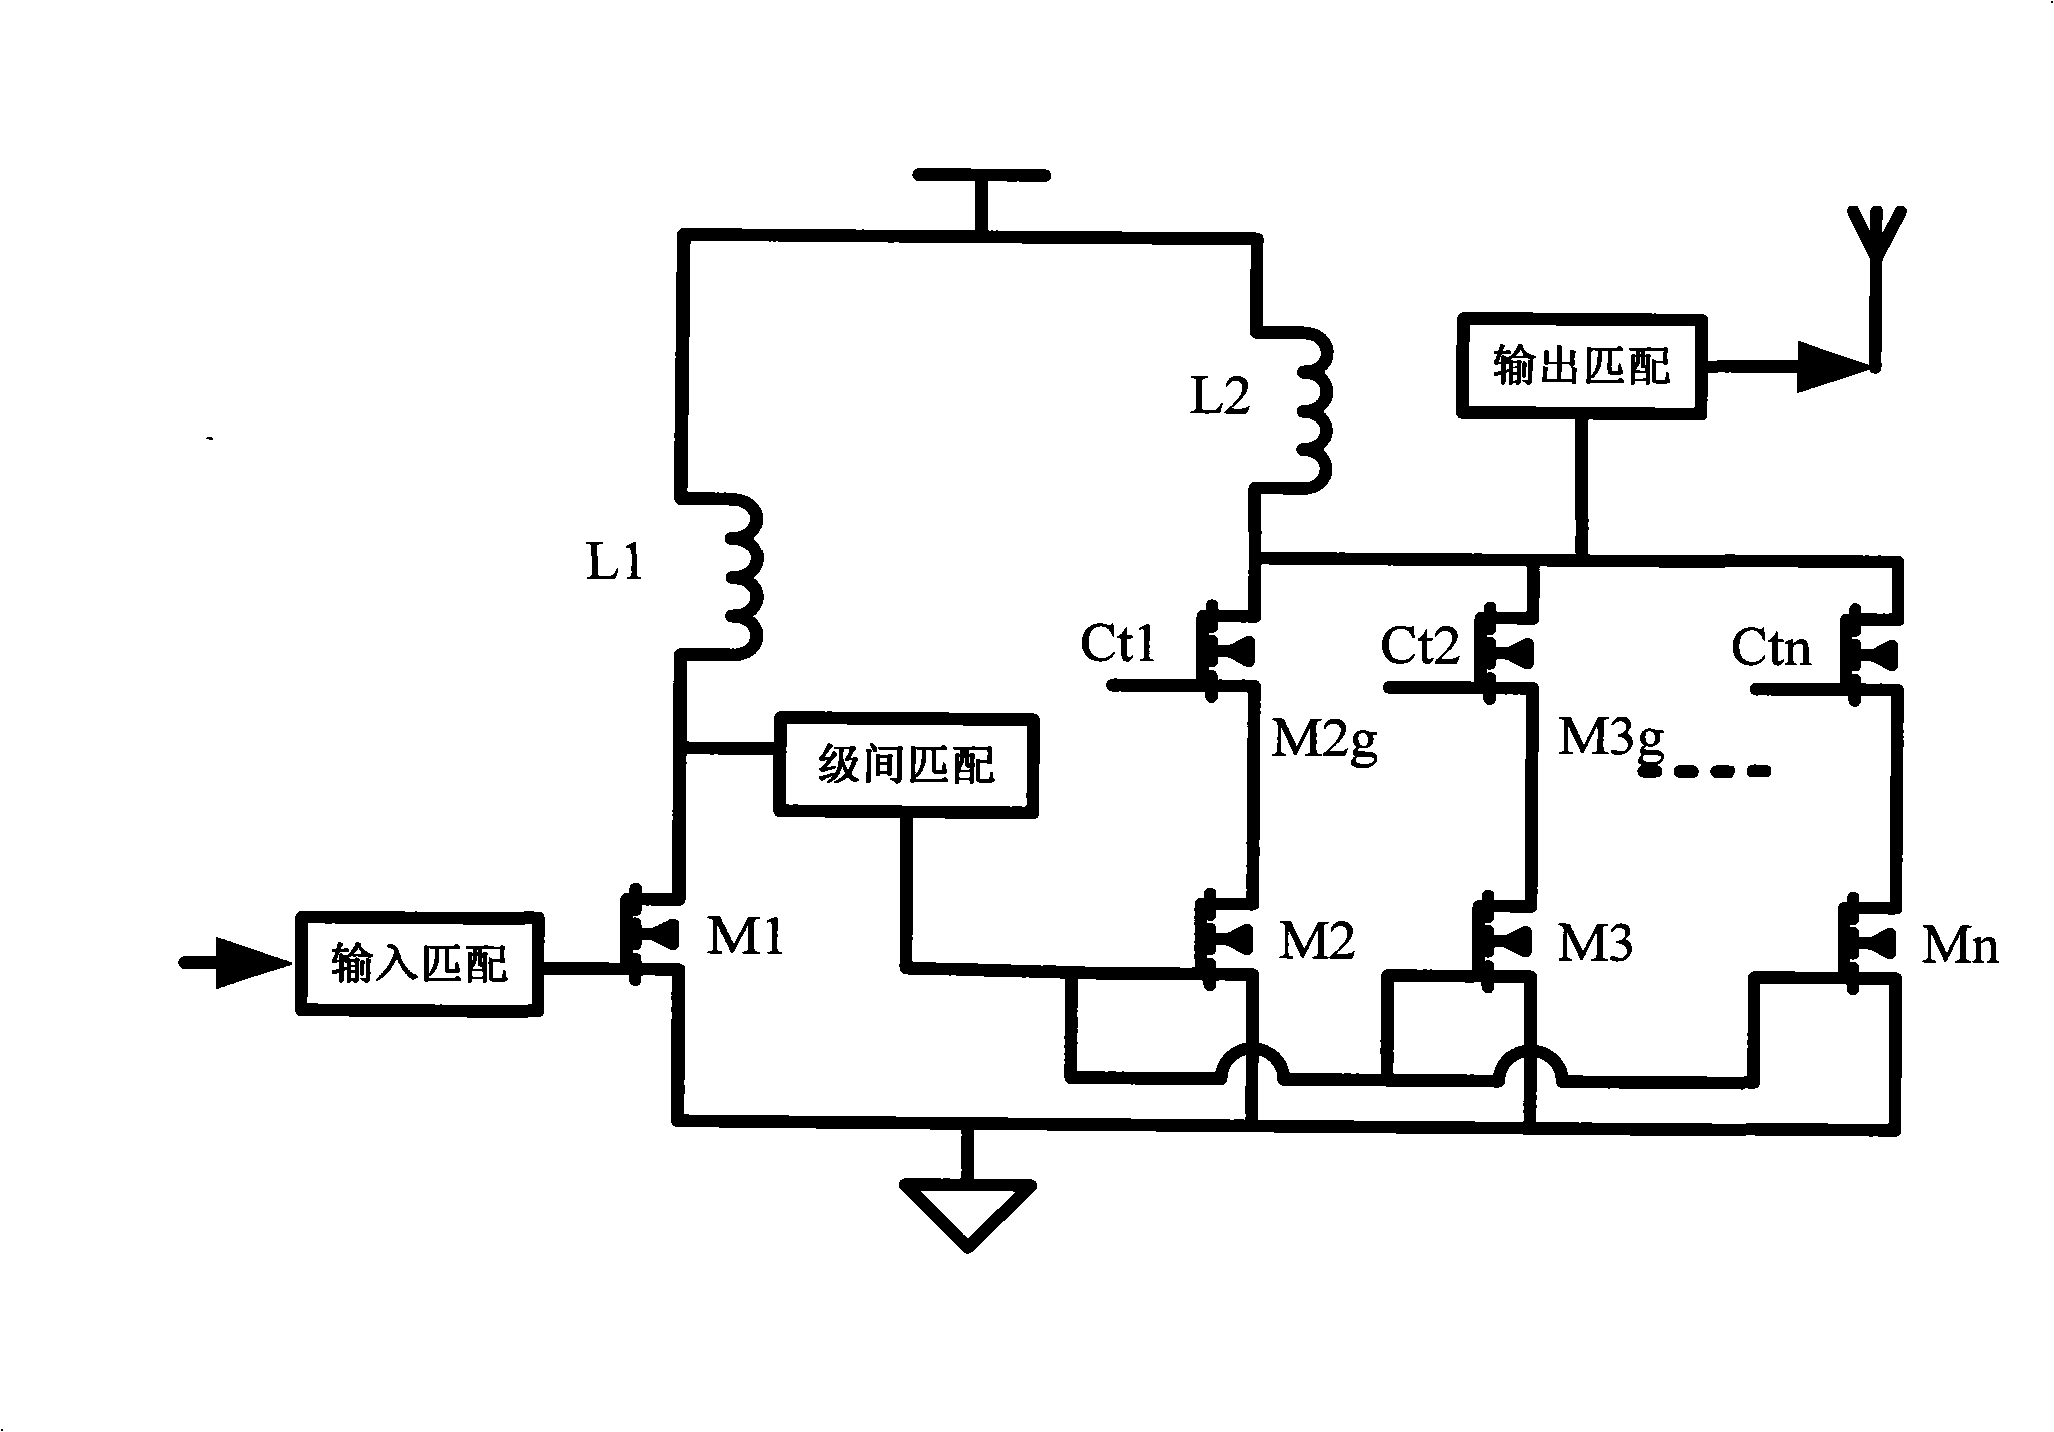 Radio-frequency power amplifier for amplitude modulation and UHF radio frequency identification tag